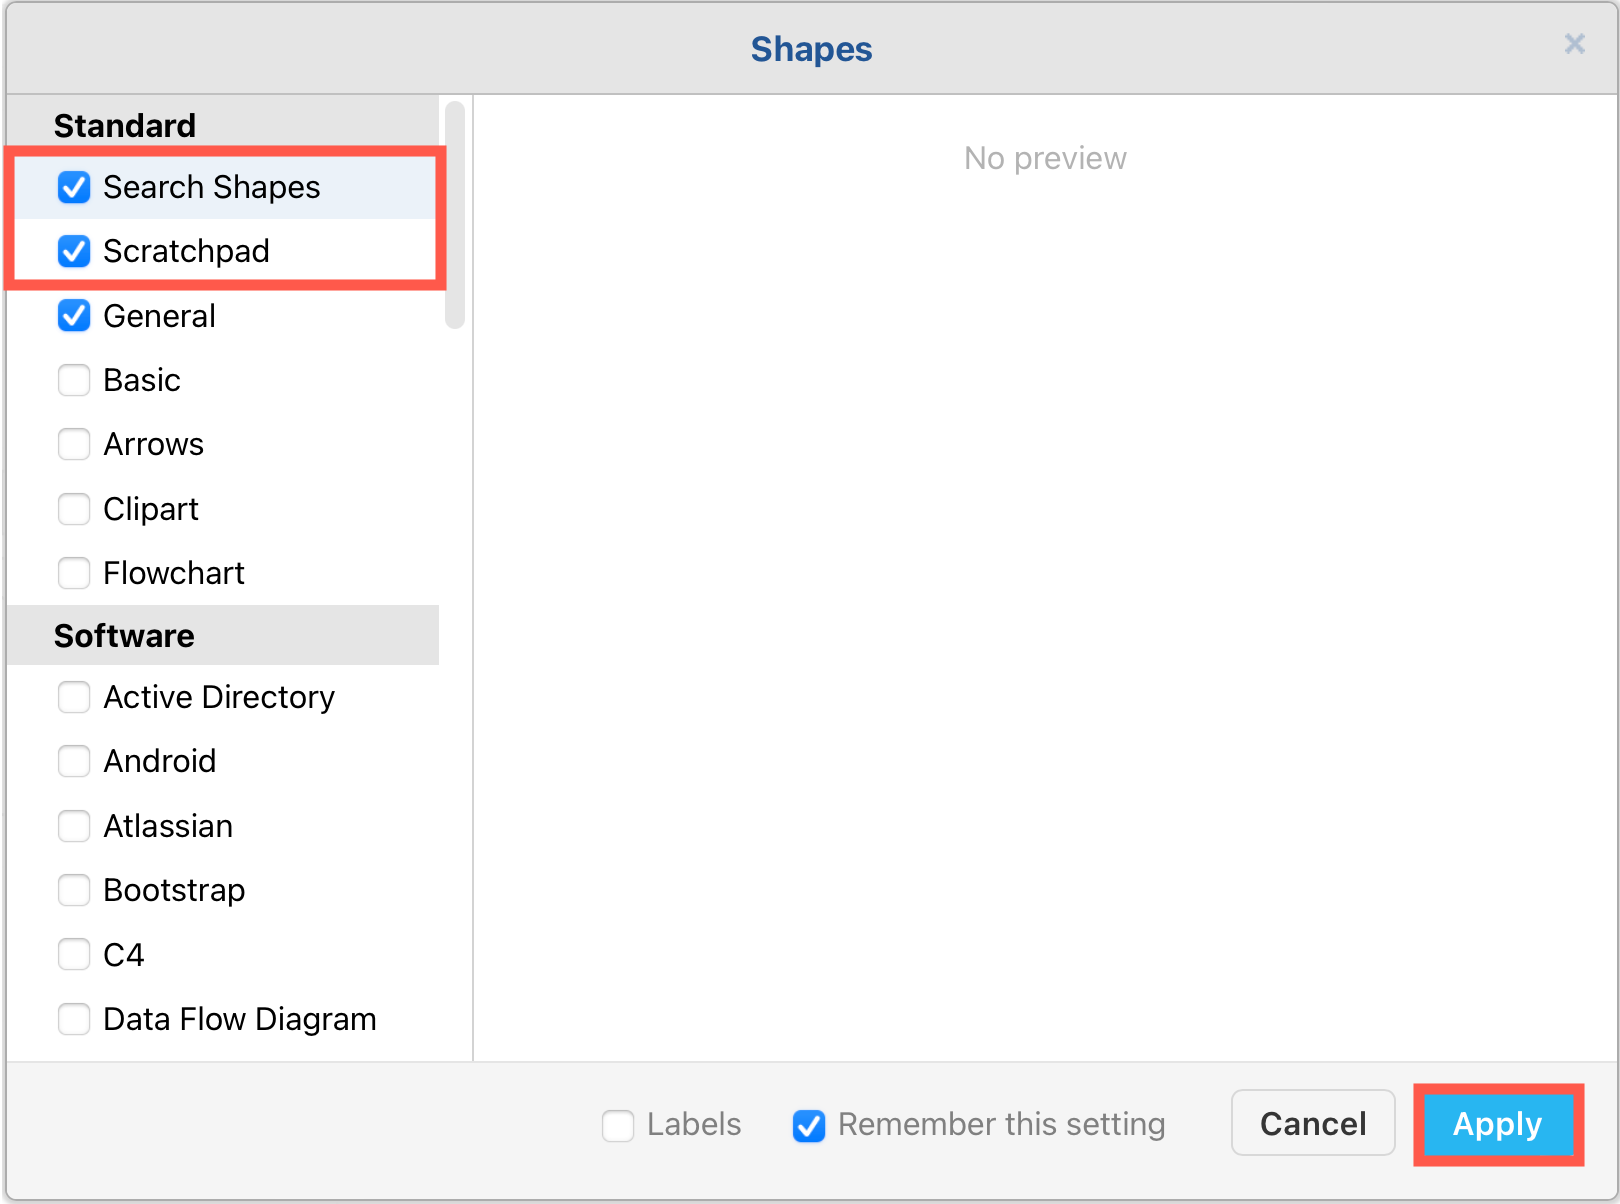 Show or hide the search and scratchpad features in the Shapes panel